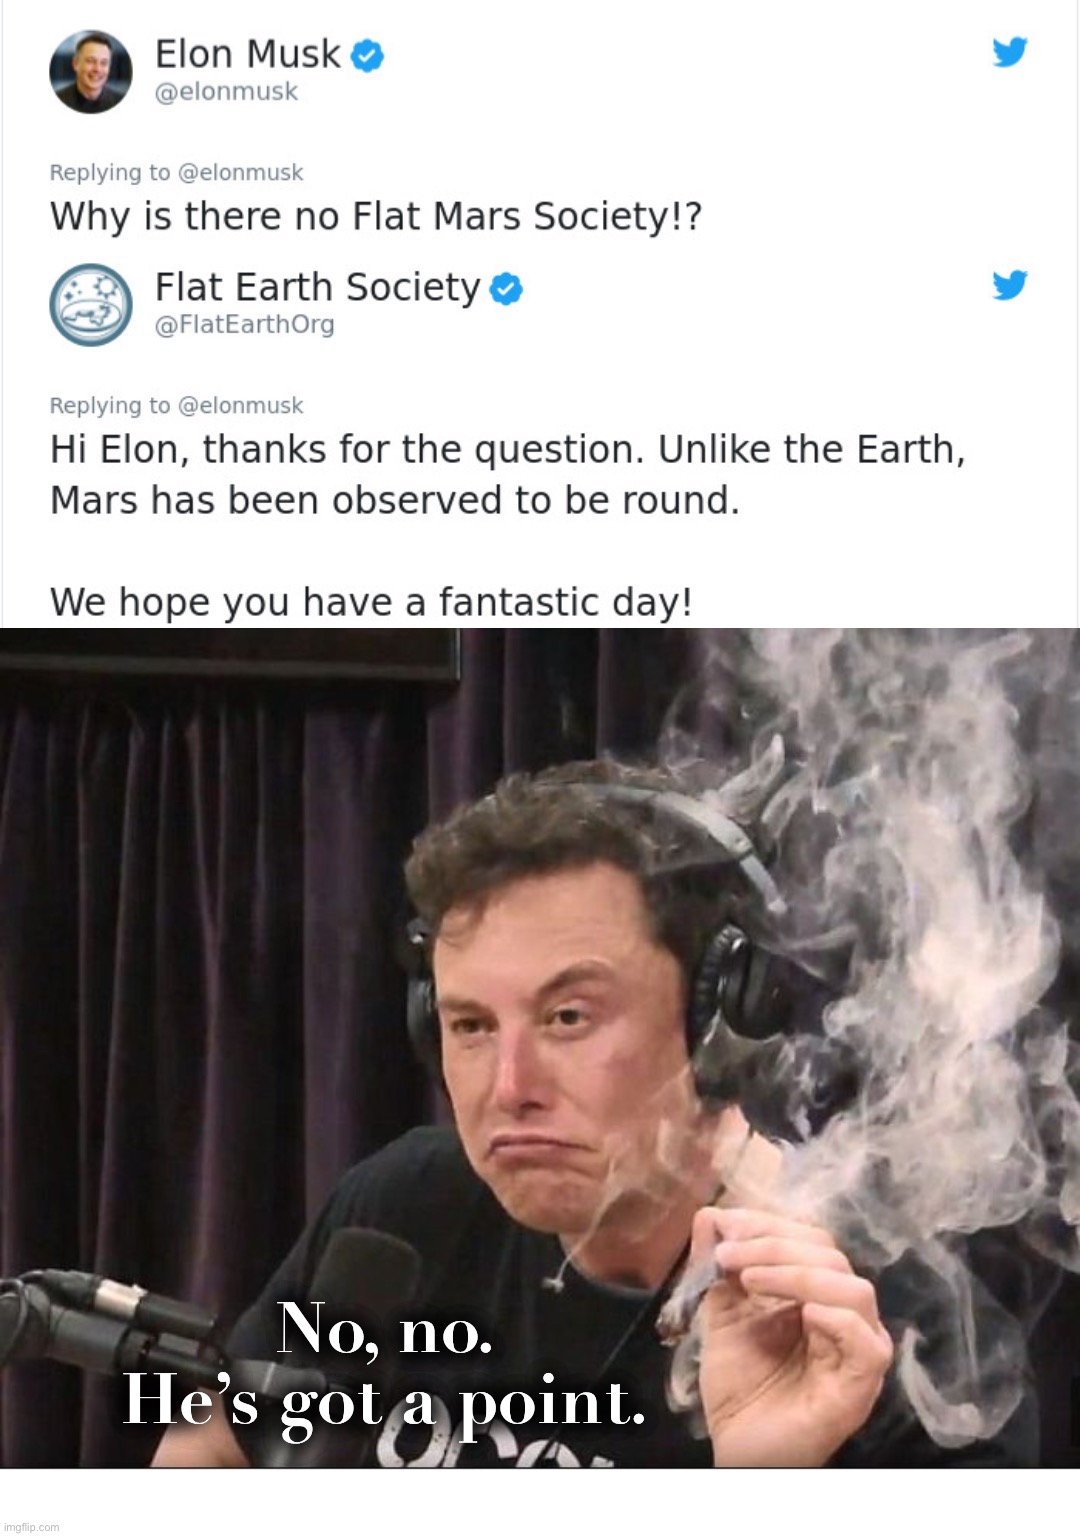 No, no.
He’s got a point. | image tagged in elon musk smoking a joint,memes,flat earth,funny memes,dank memes,funny | made w/ Imgflip meme maker